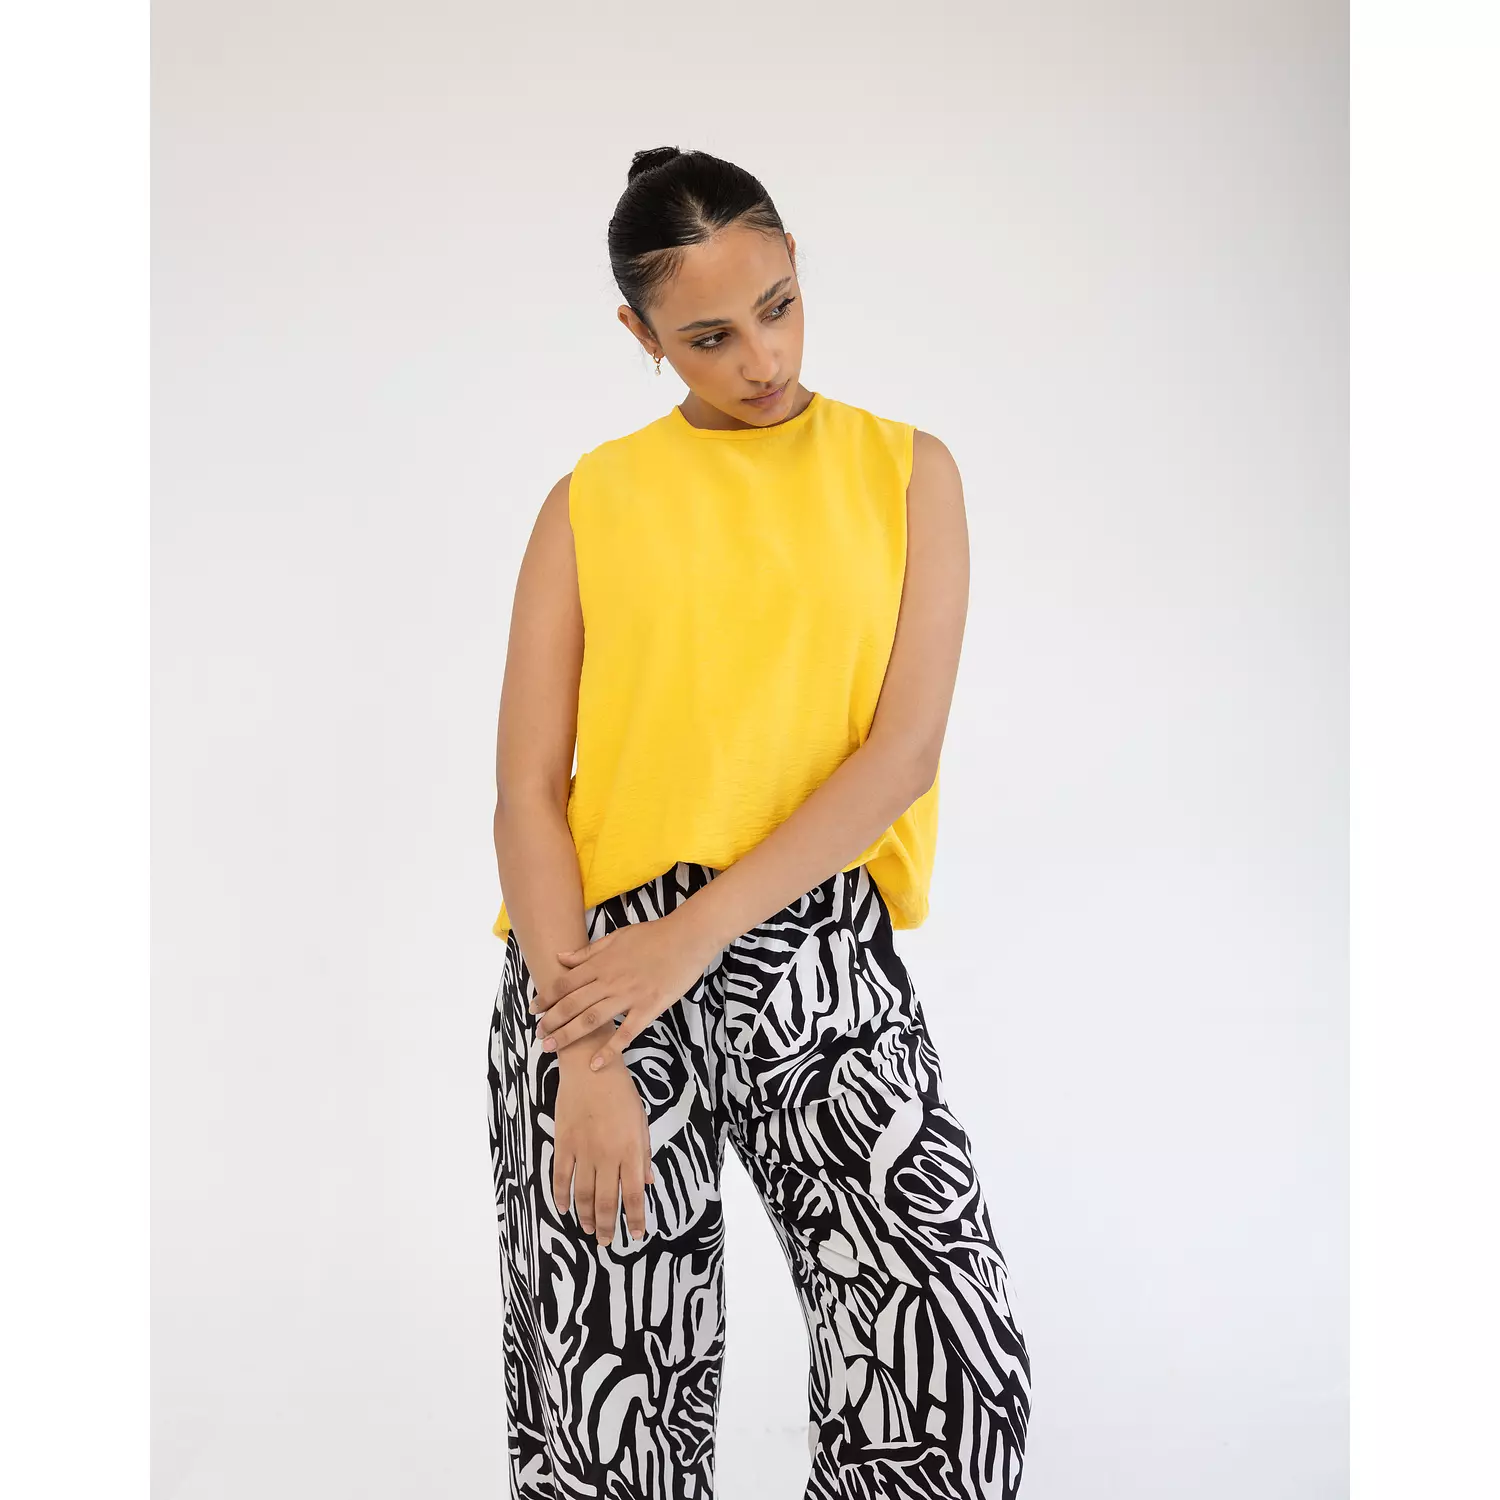 YELLOW BASIC TOP  hover image